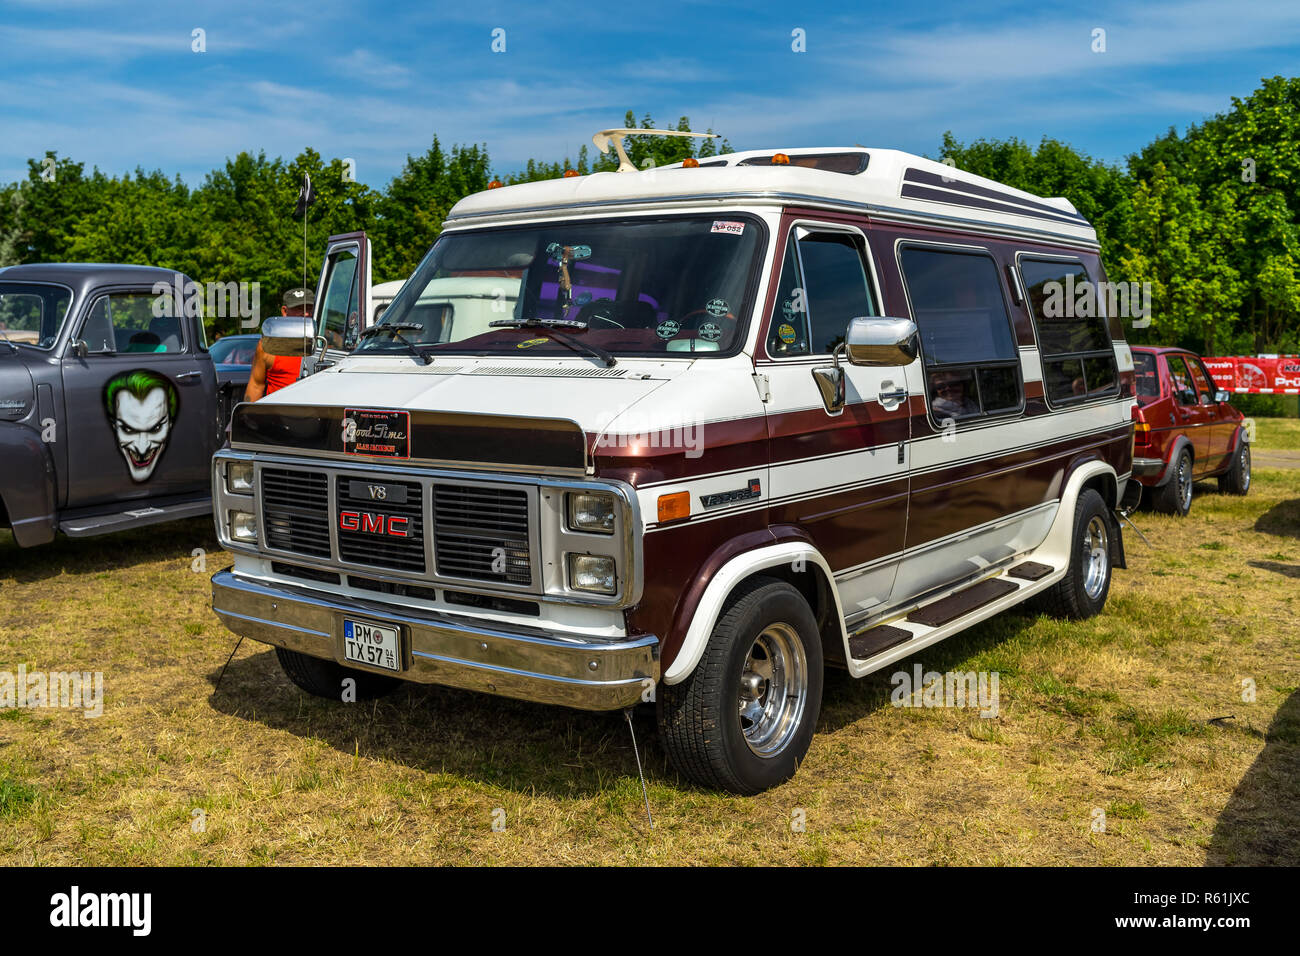 Gmc van stock photography and images - Alamy